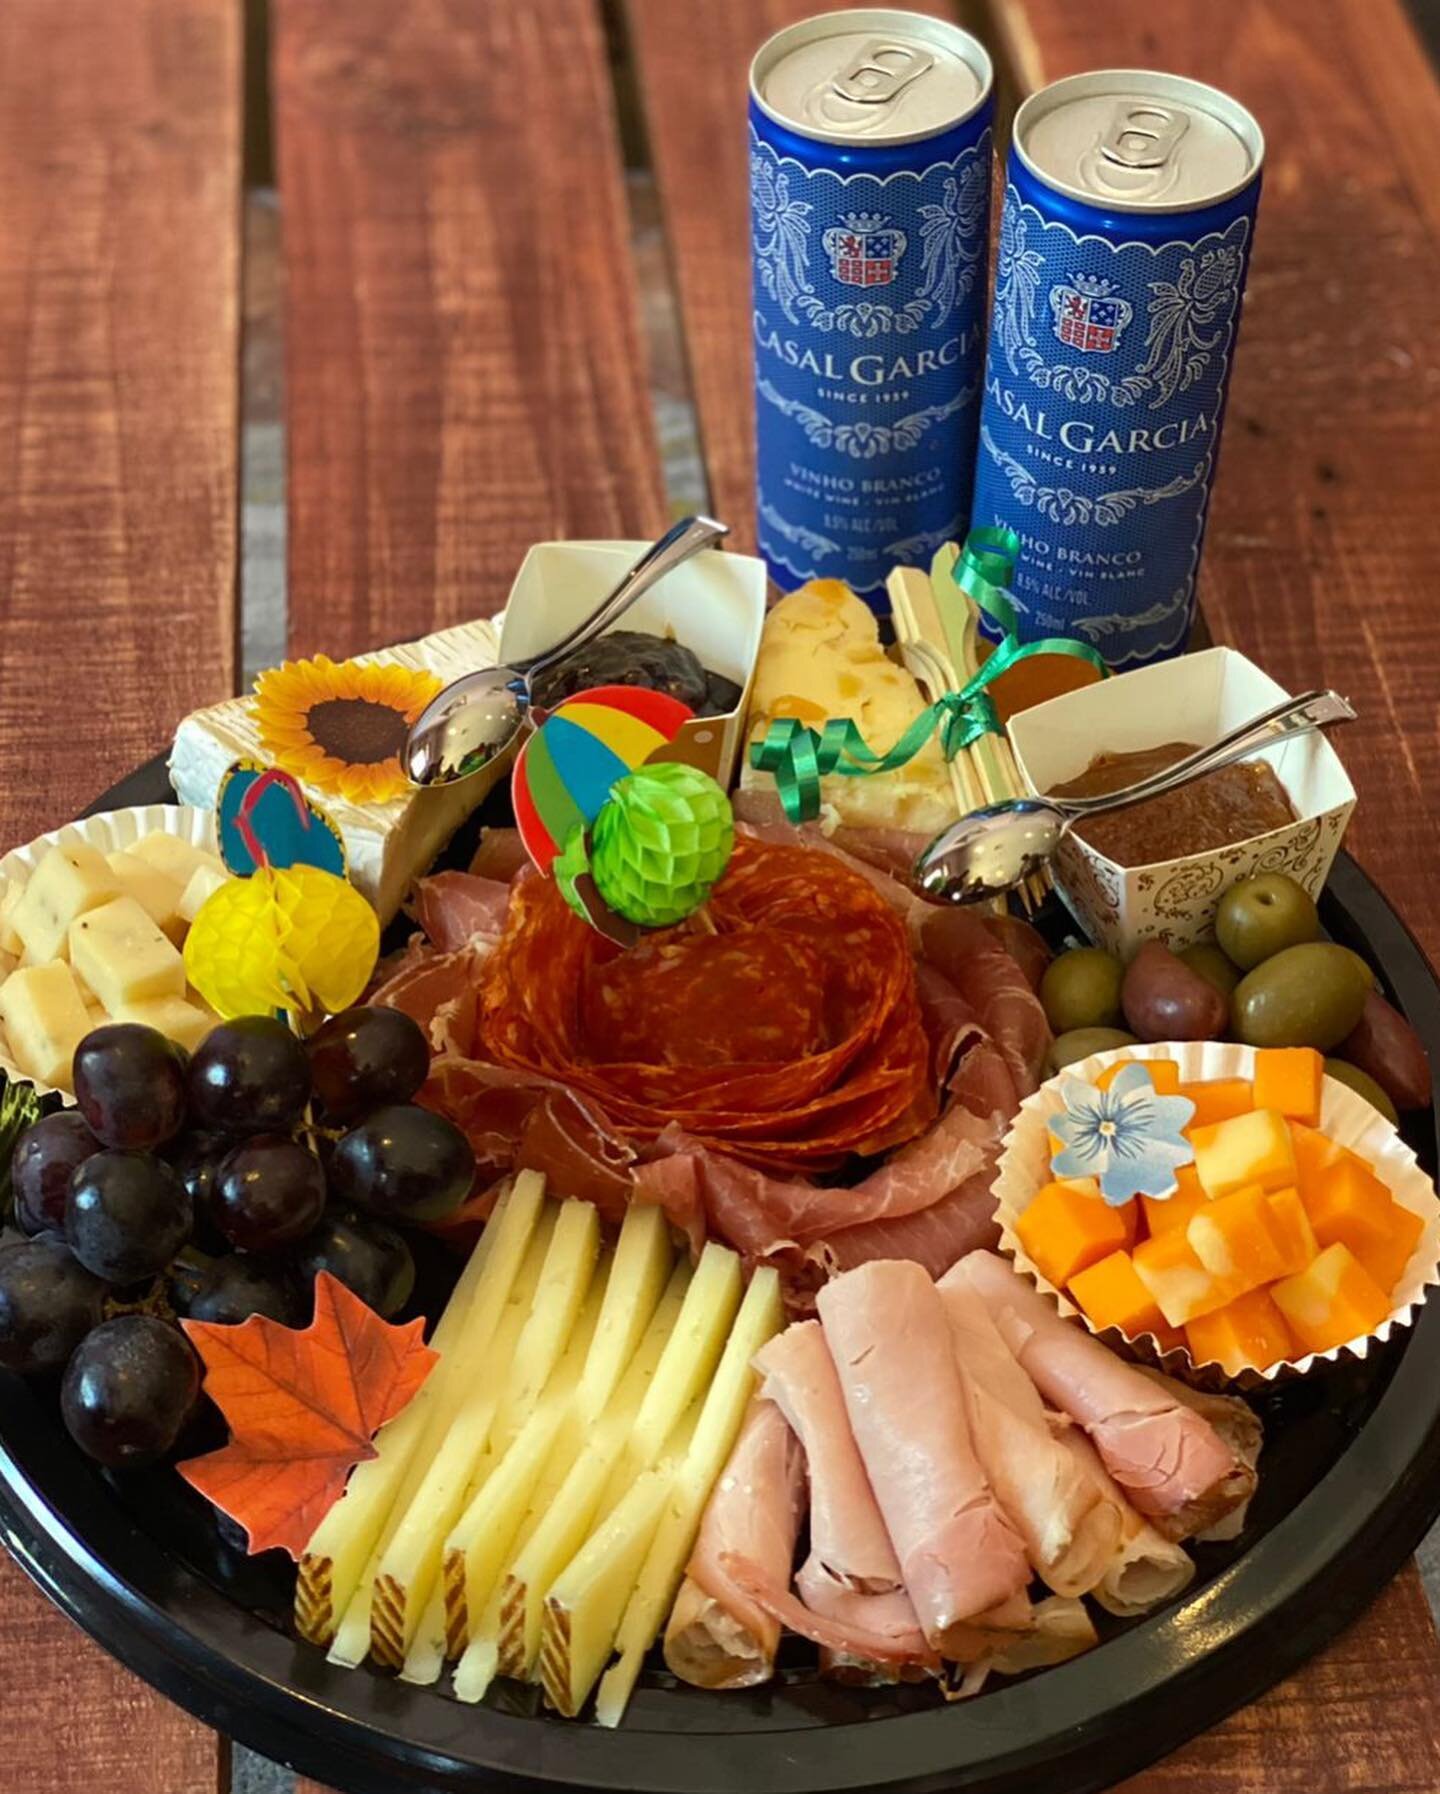 Our new creation, the 
Picnic platter for $100. 
With a package deal of 2 wine spritz either vino verde or moscato for $125. Tag who you would share this with at a picnic! 🧺🧀🥖🍷